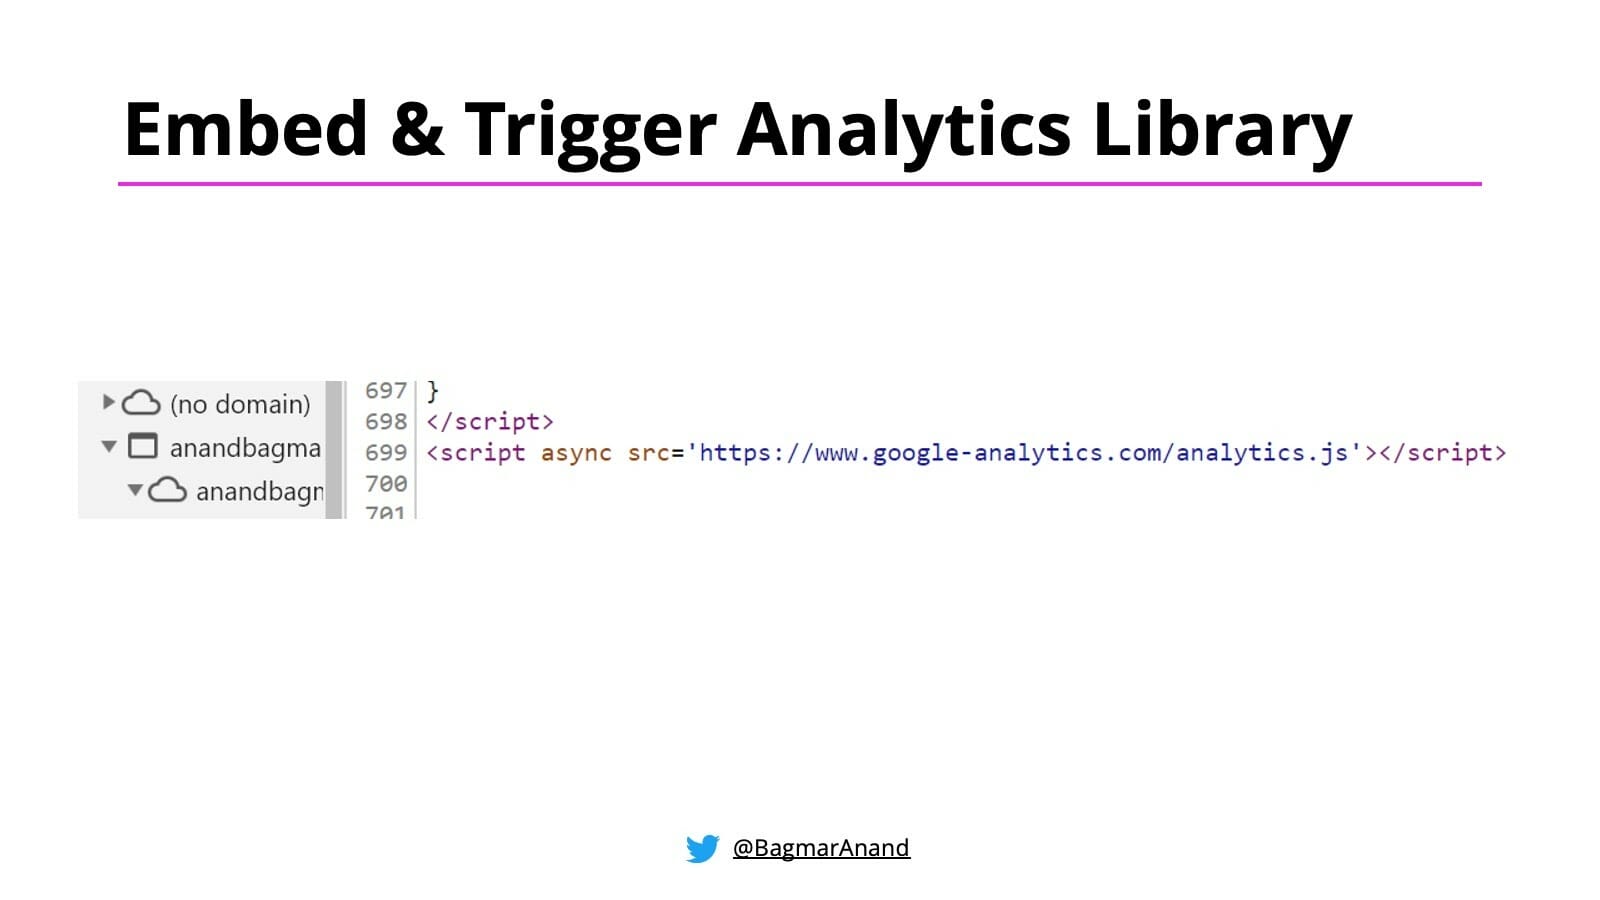 Embedding and Triggering an Analytics Library